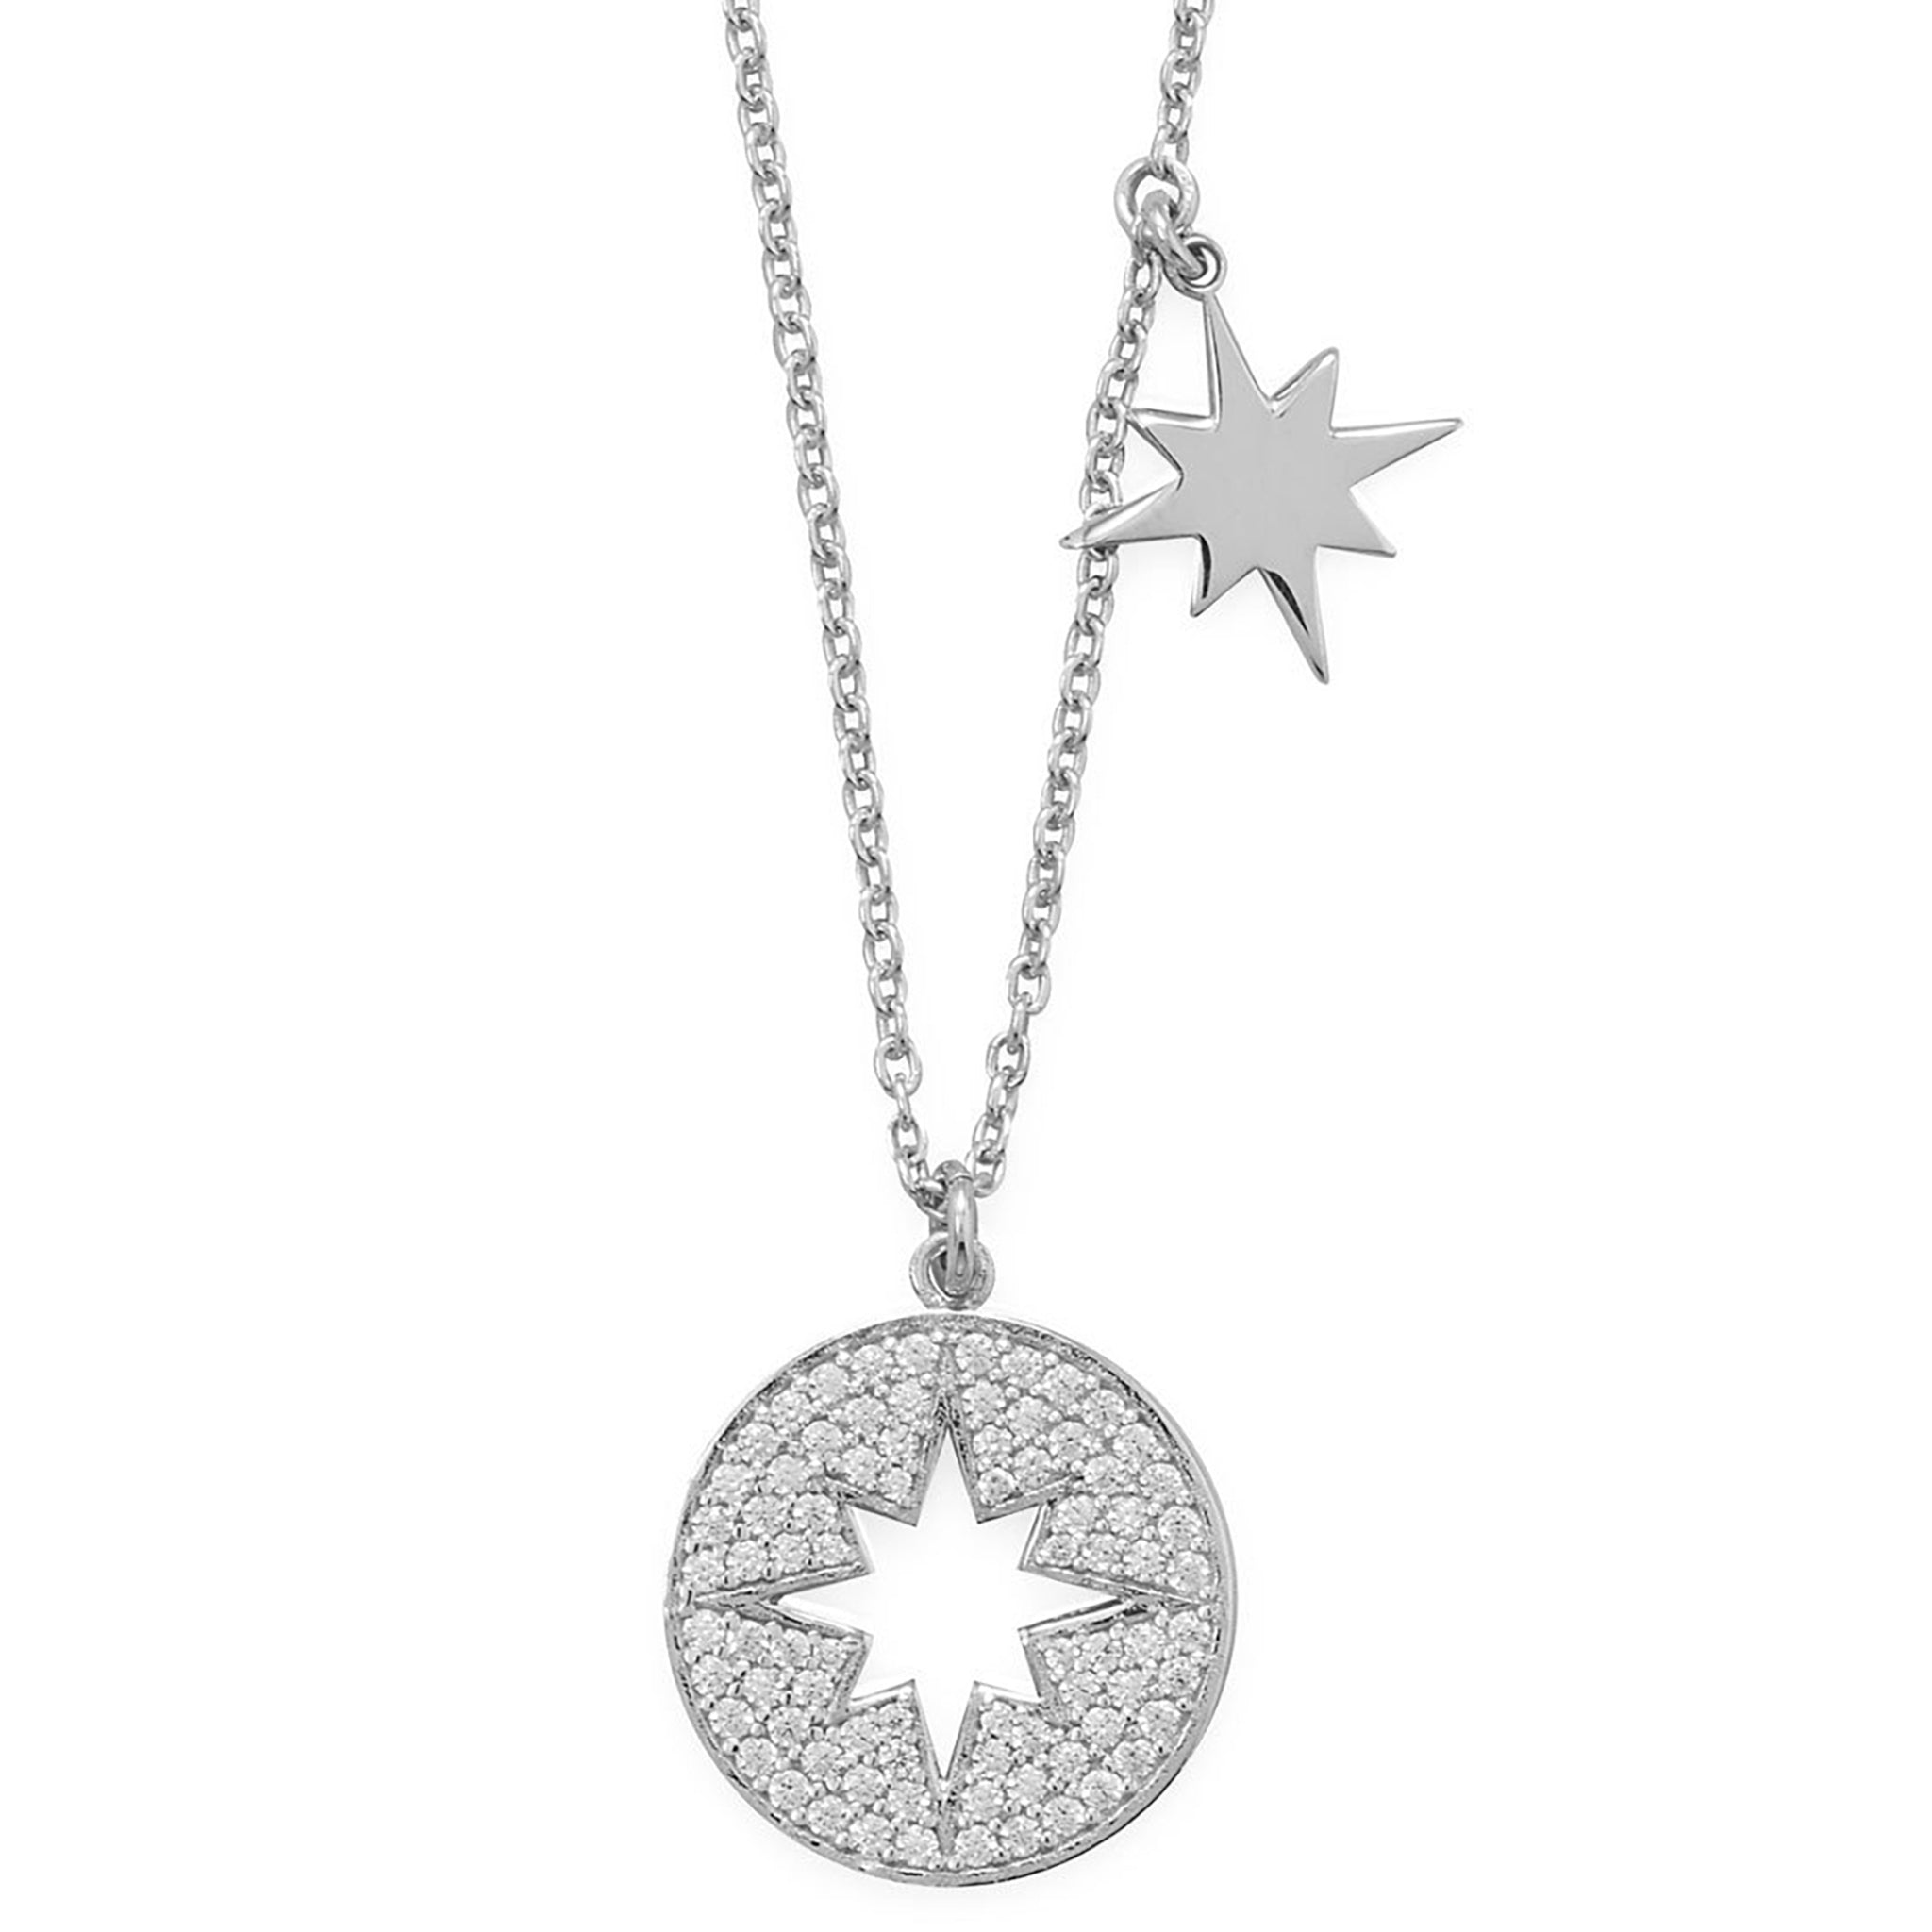 Cut Out Starburst Necklace